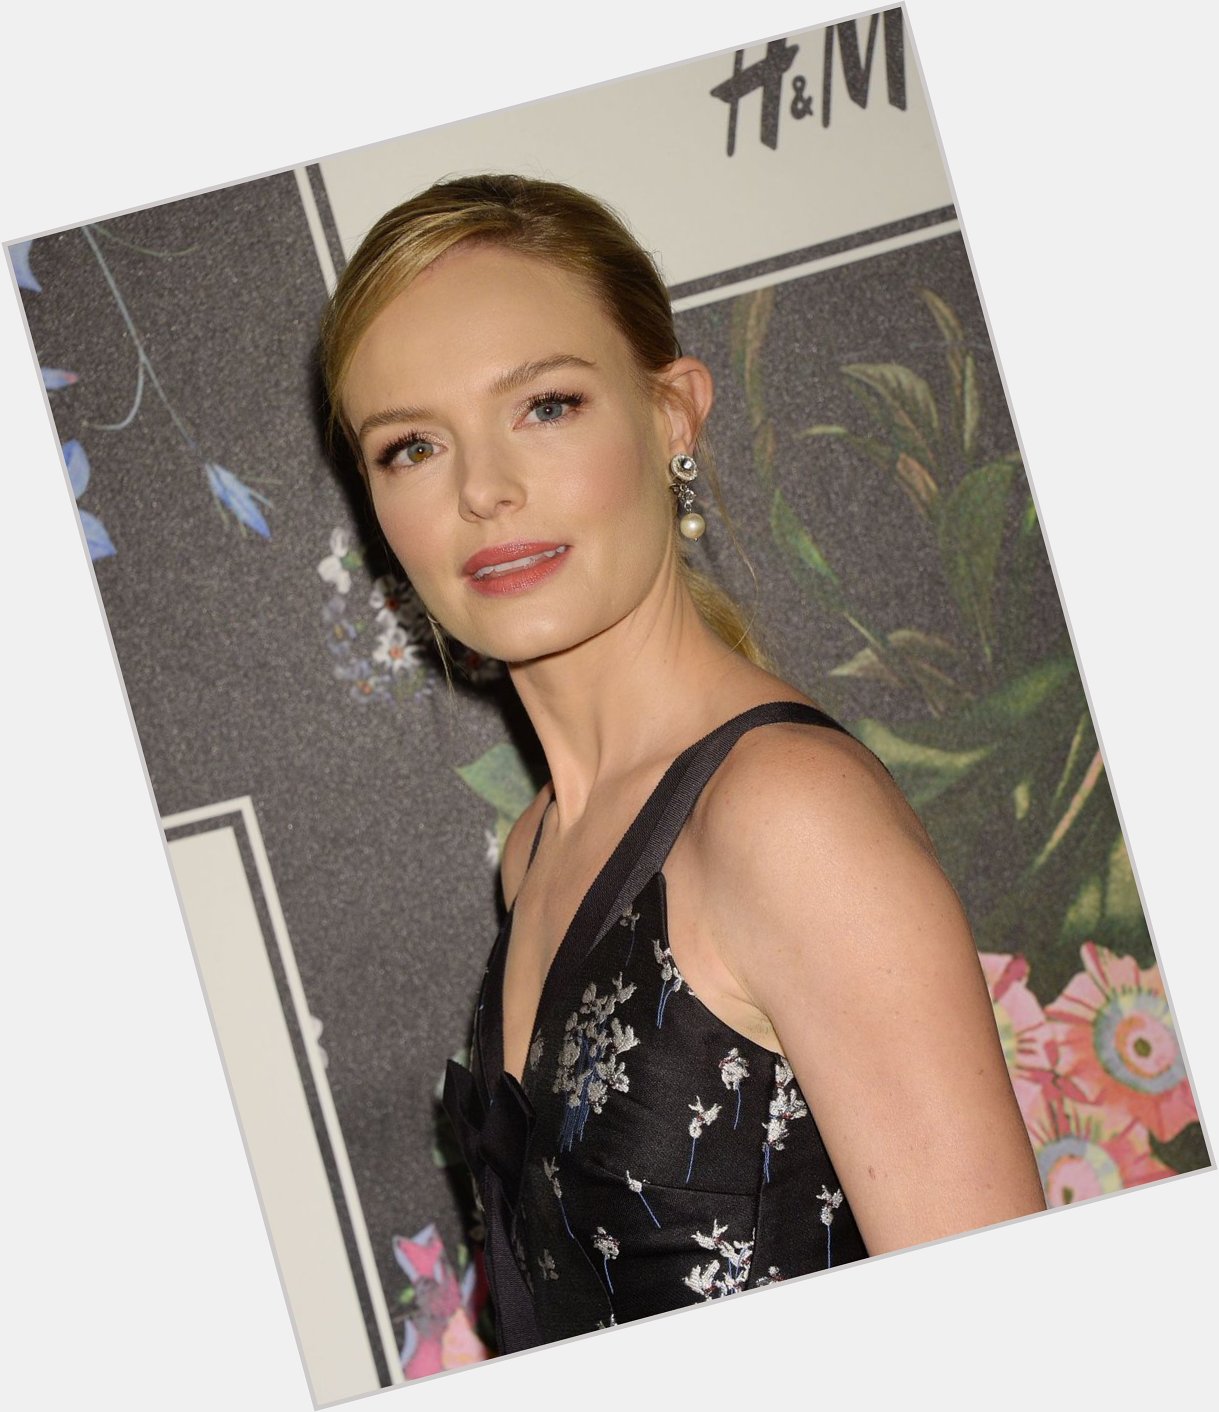 Happy Birthday Shout Out to the lovely Kate Bosworth!! 